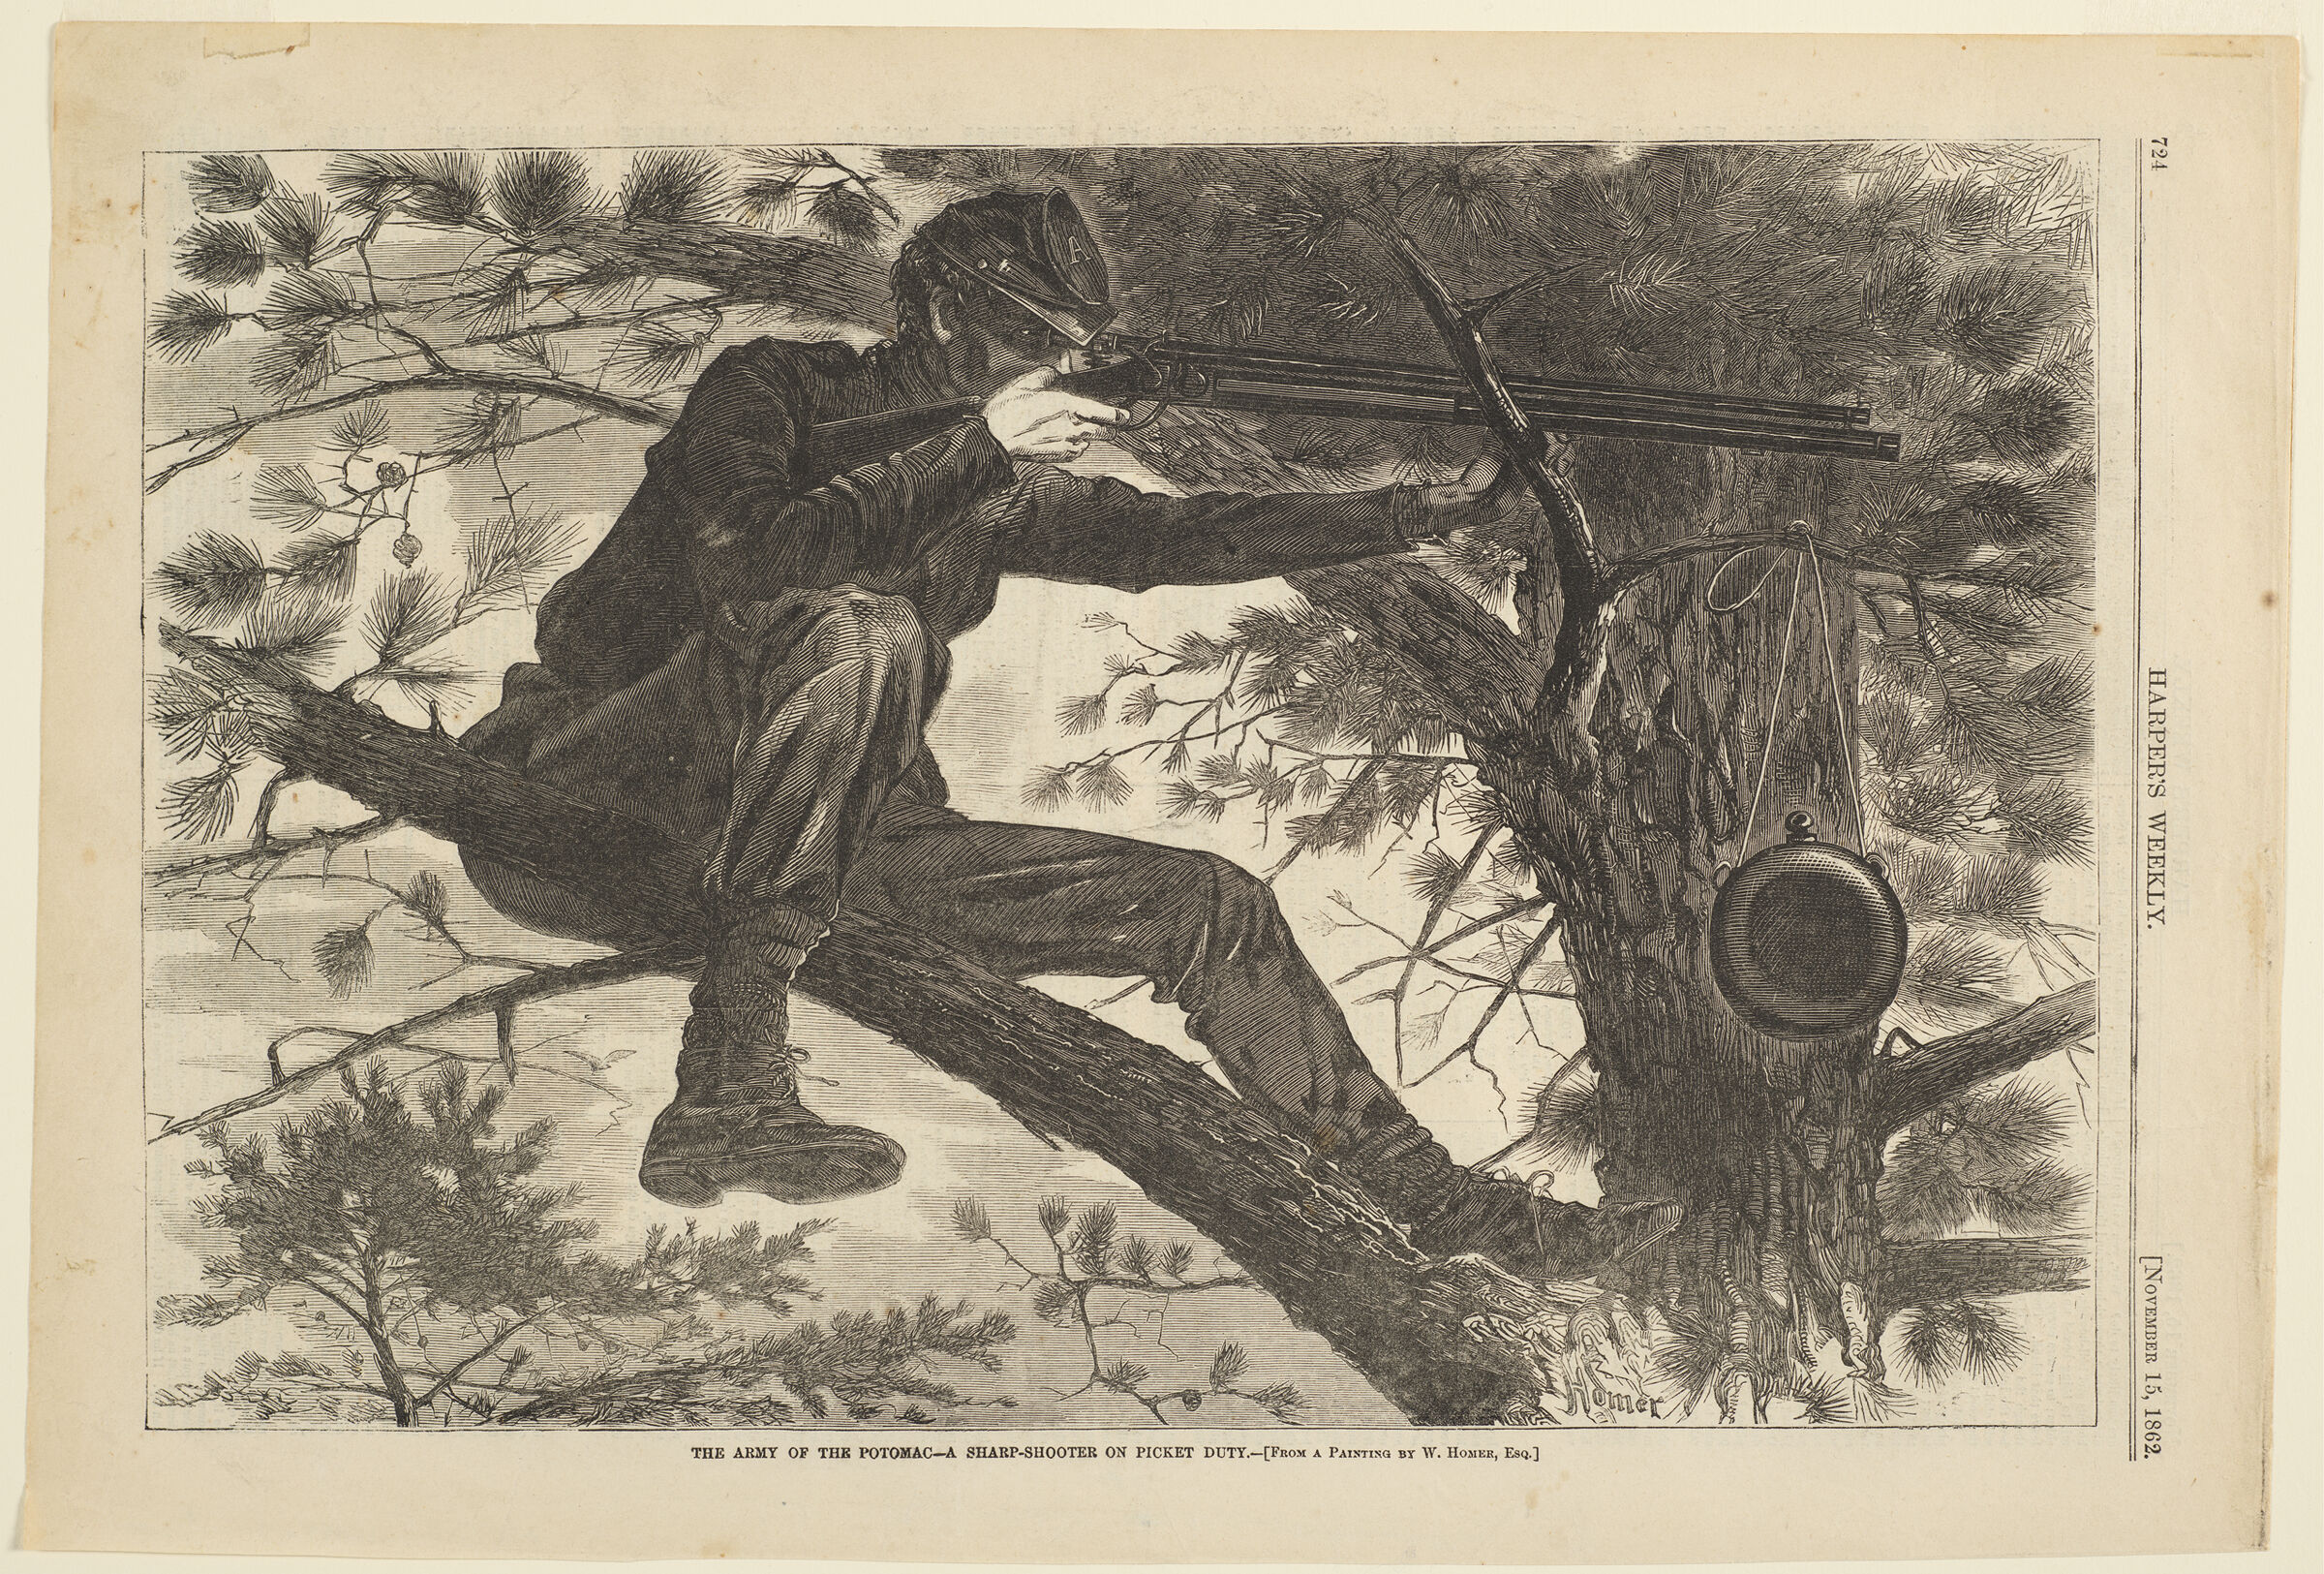 The Army Of The Potomac - A Sharp-Shooter On Picket Duty - [From A Painting By W. Homer, Esq.]